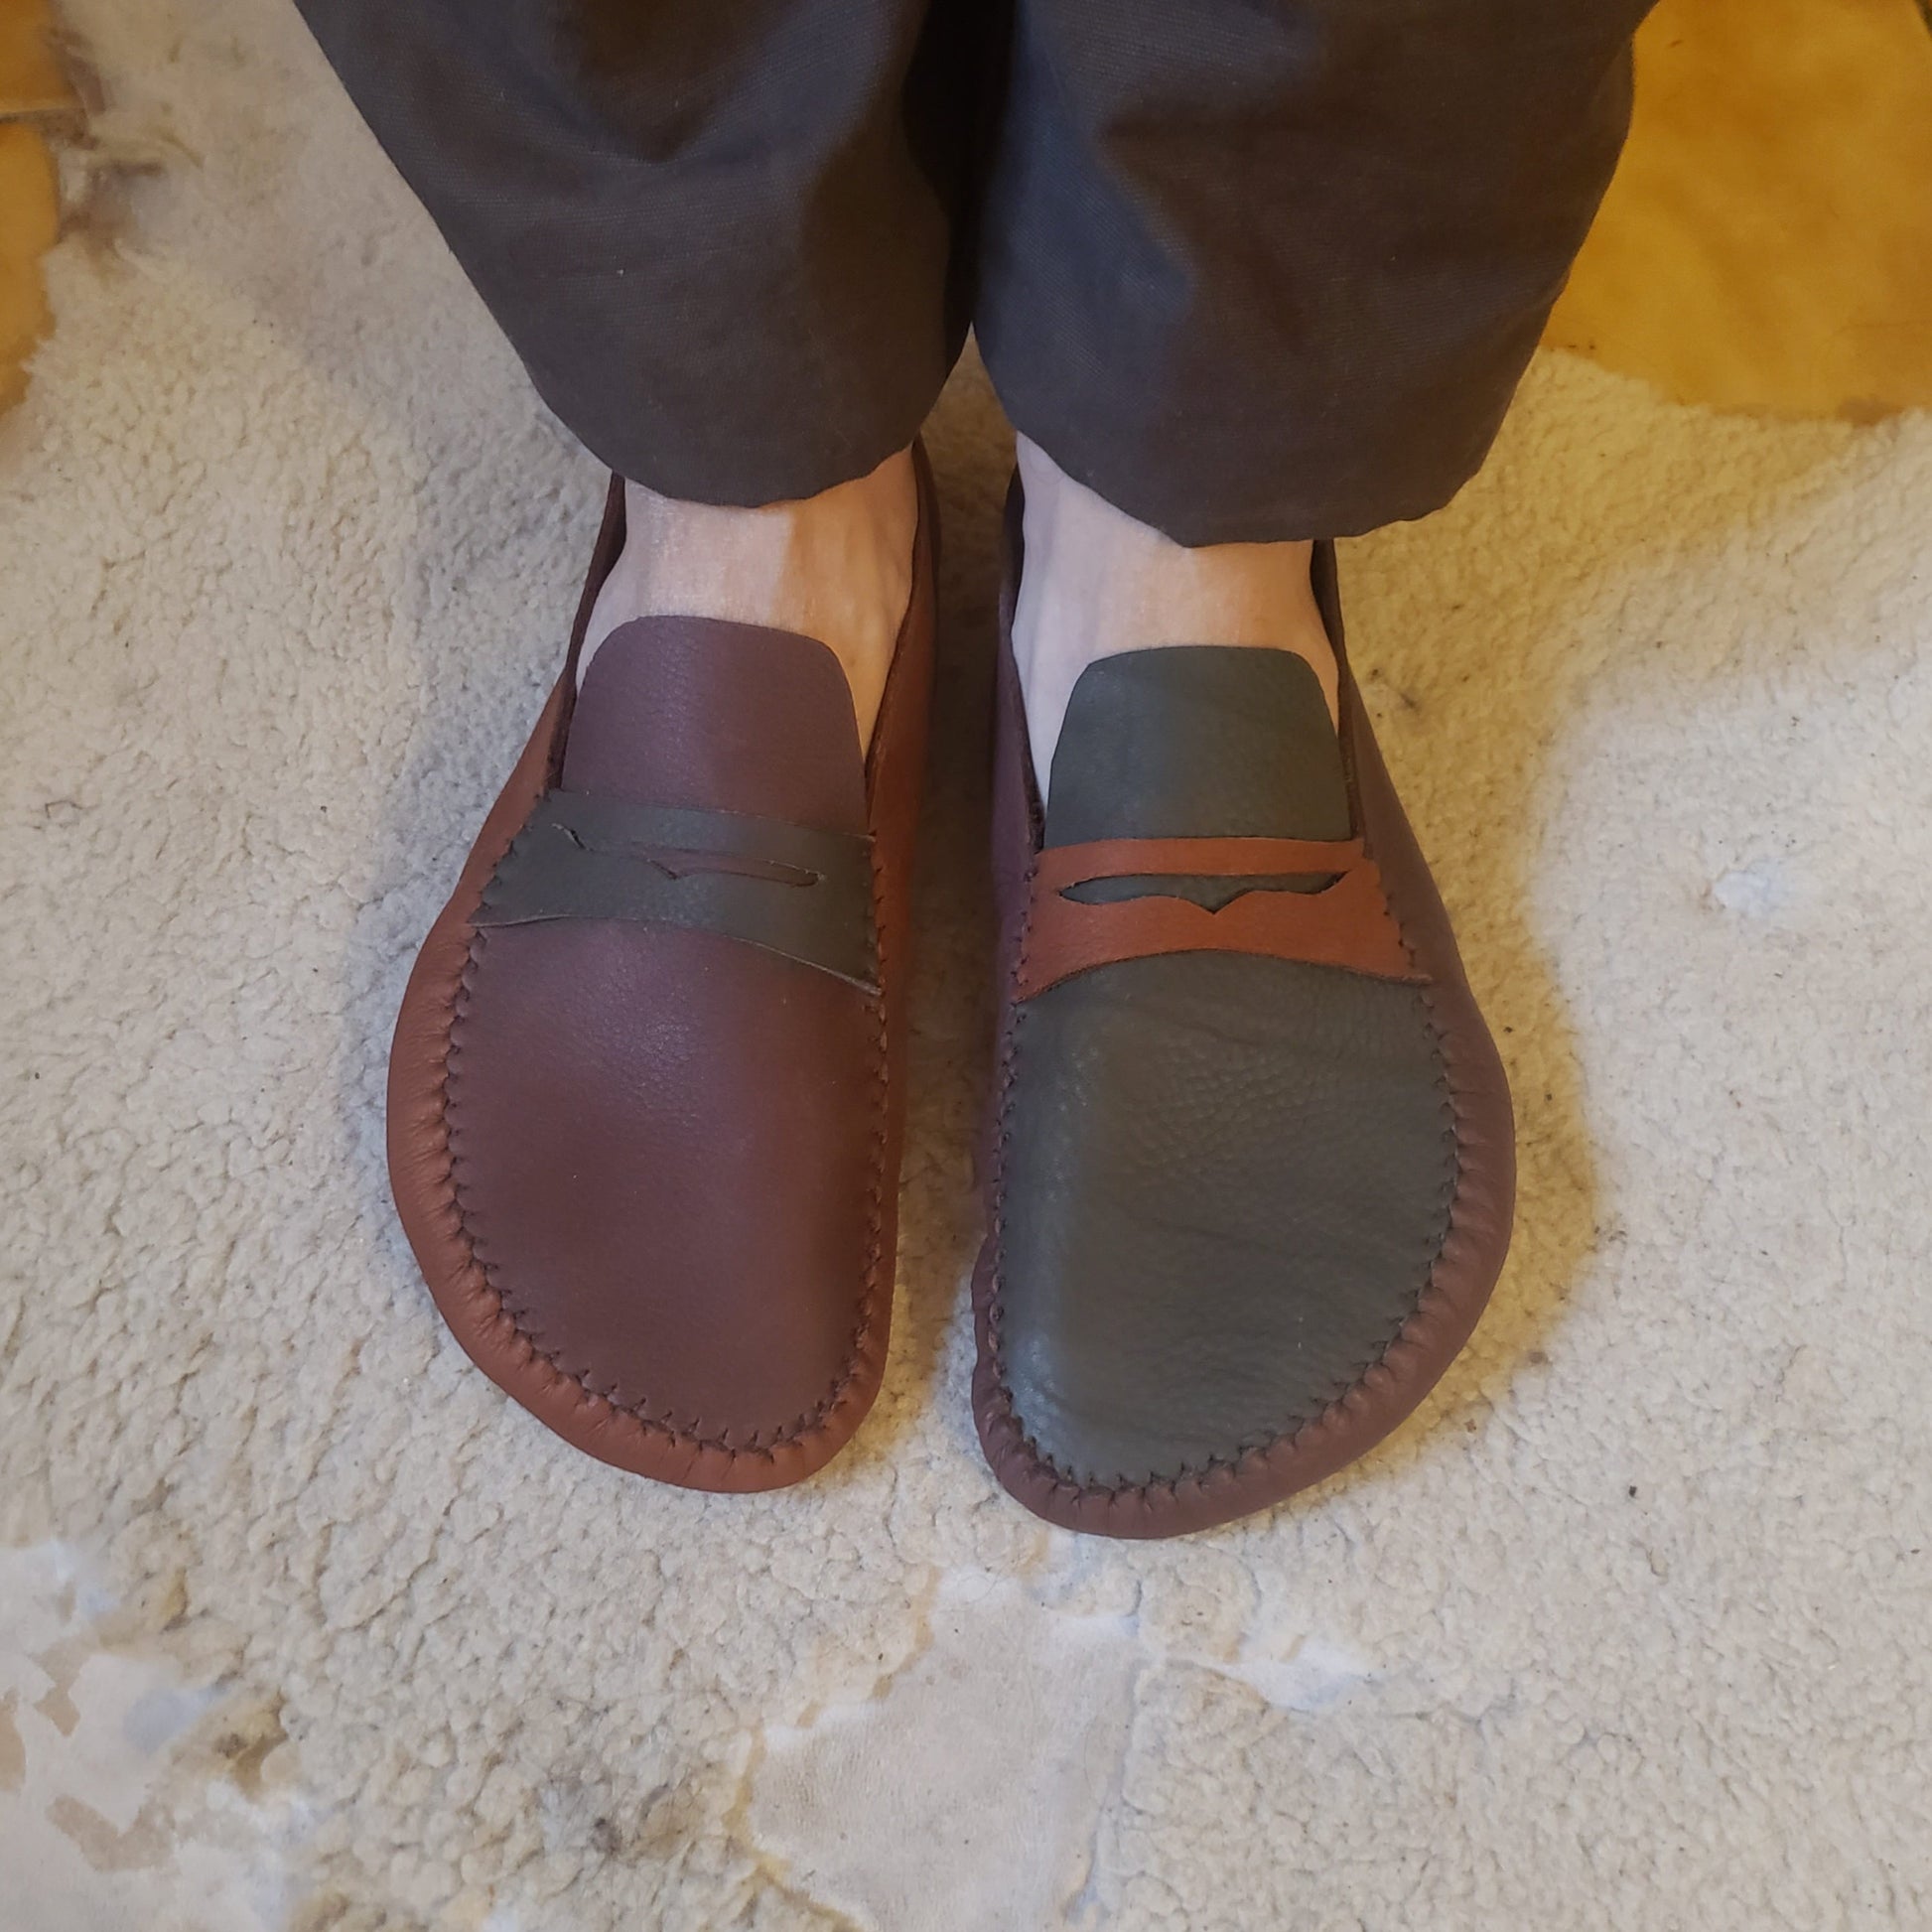 Taylor-made Oxford Moccasins